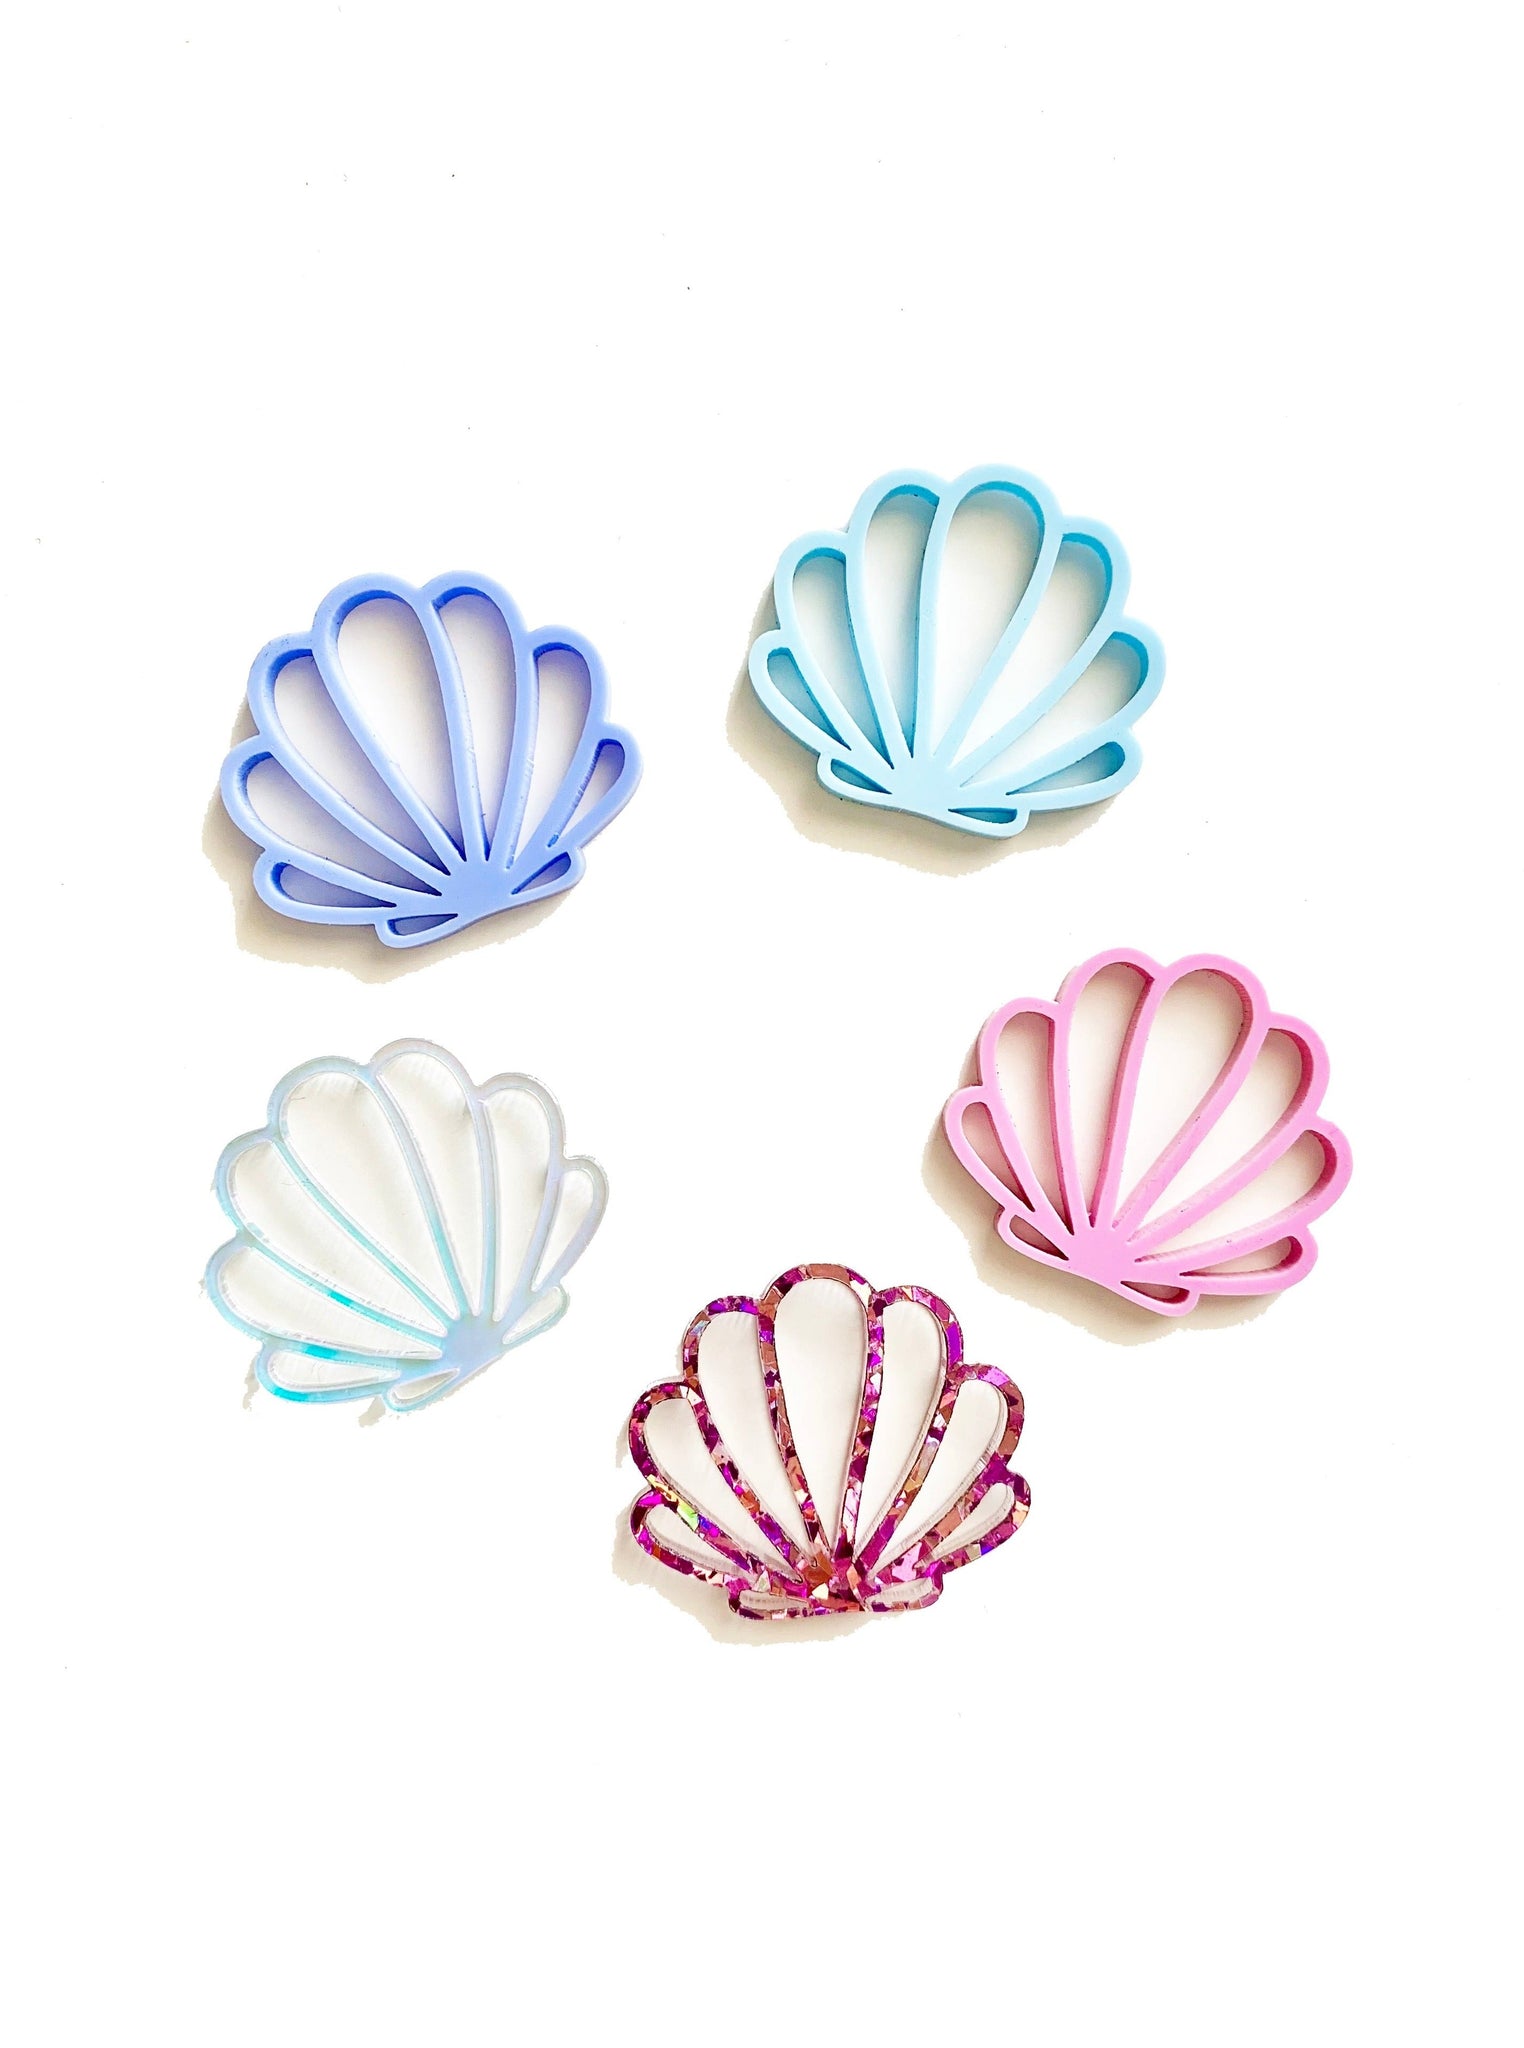 Mermaid Shell Pastel Colours Acrylic Cupcake Charms Set of 6